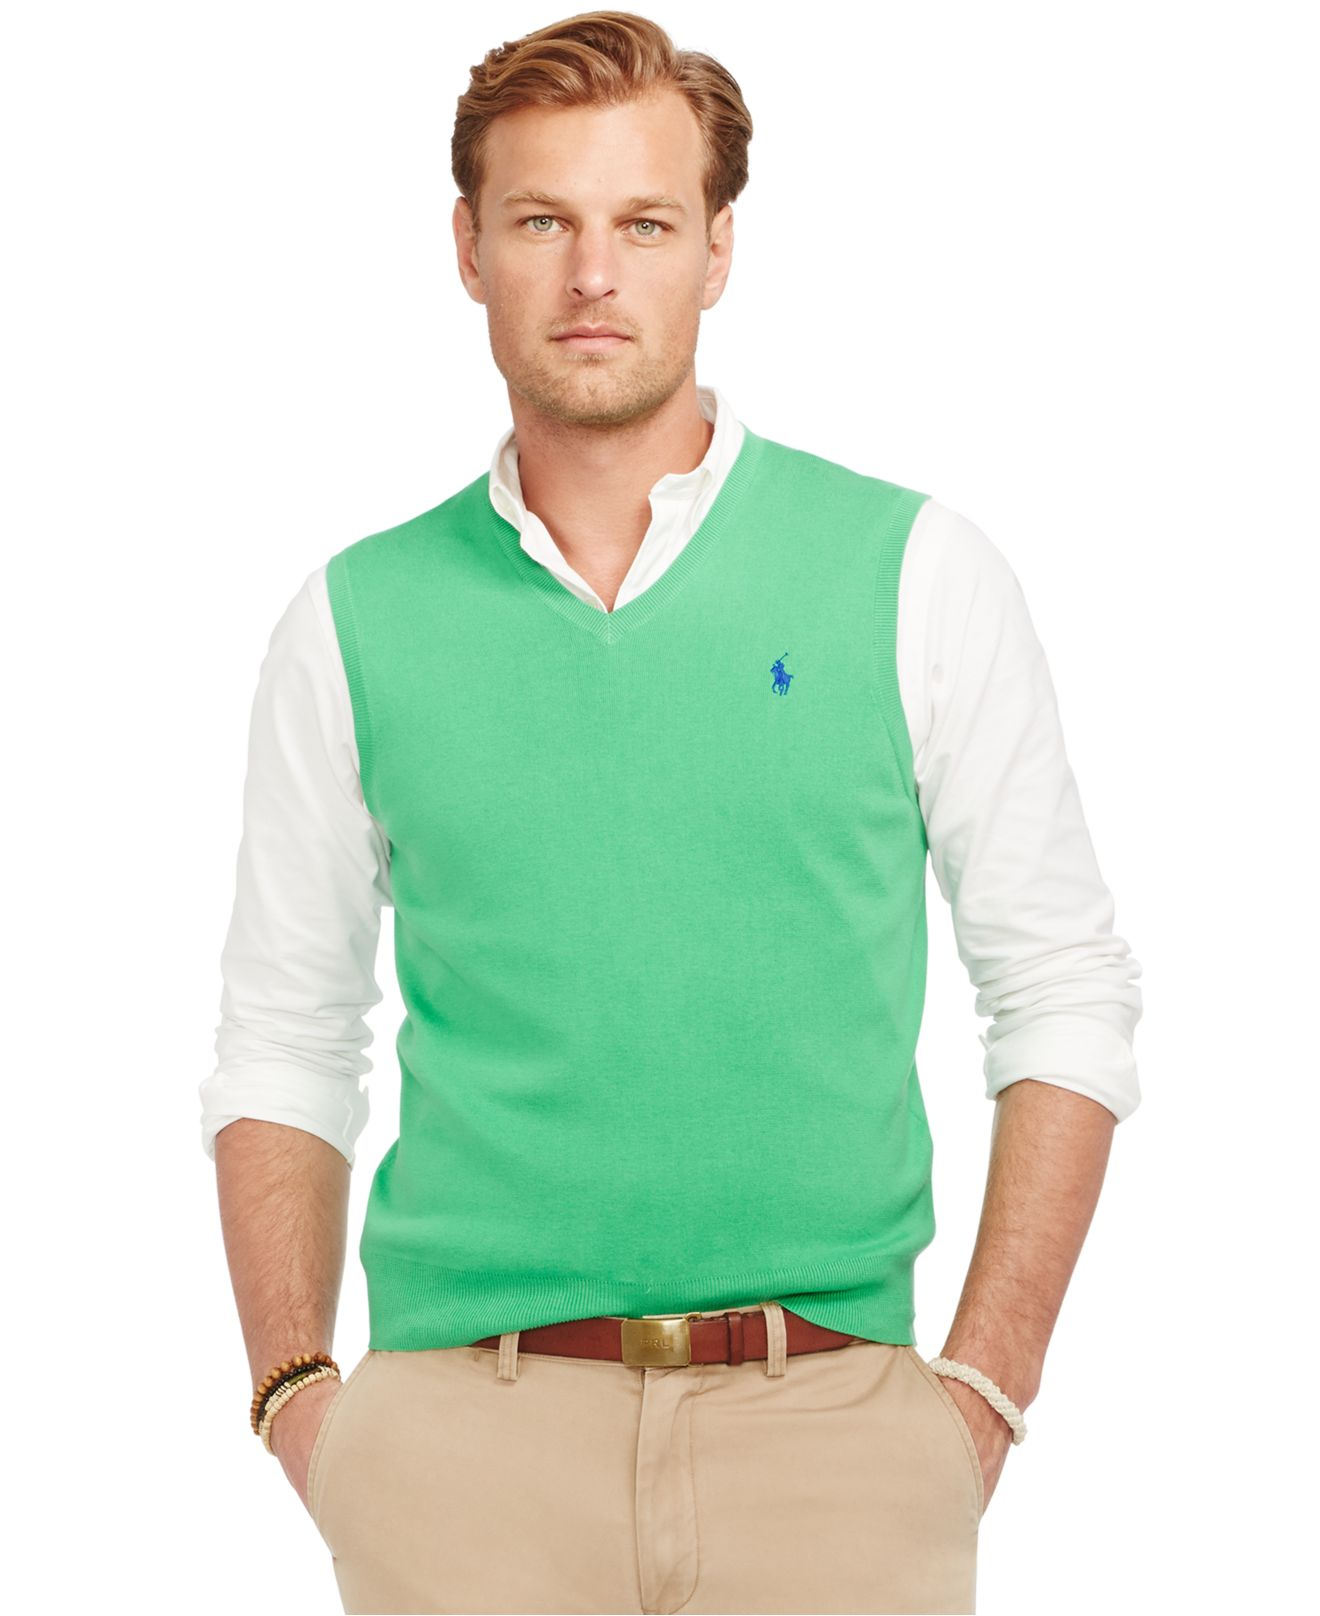 Lyst - Polo Ralph Lauren Big And Tall Pima V-neck Vest in Green for Men